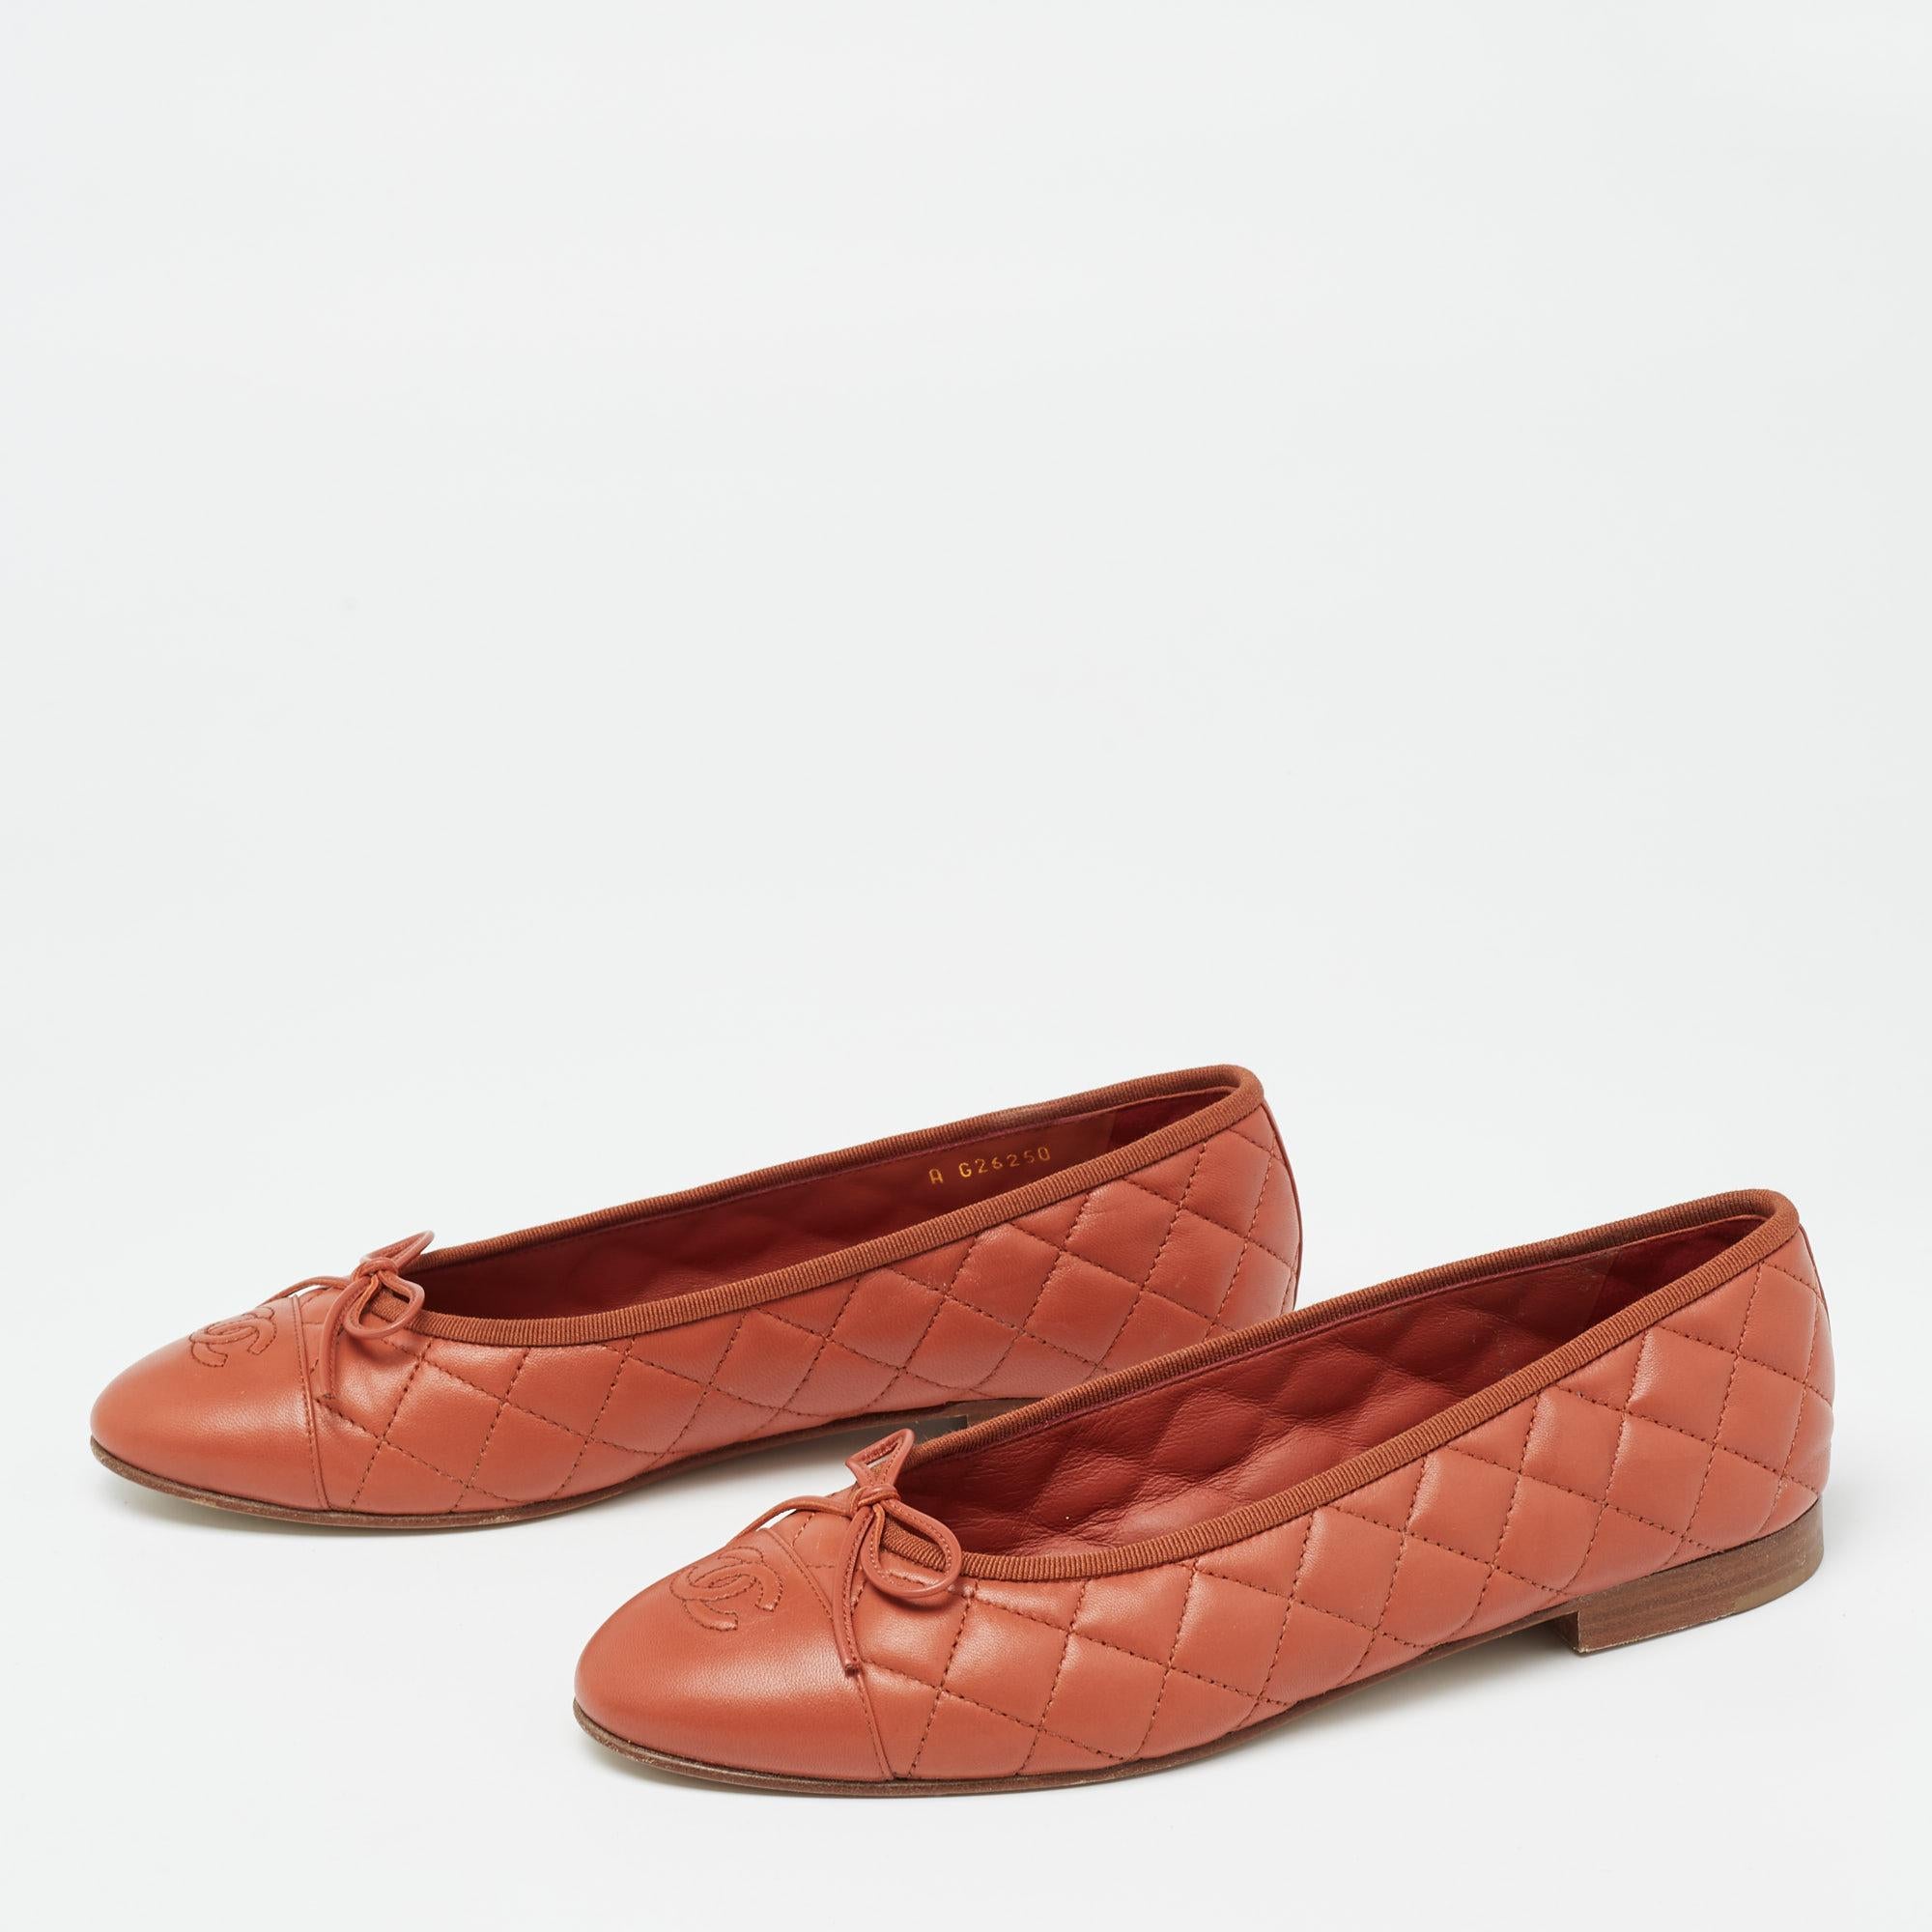 A common sight in the closets of fashionistas is a pair of Chanel ballet flats. They are perfect to wear on busy days and just stylish enough to assist one's style. These are crafted from quilted leather and feature the CC logo on the cap